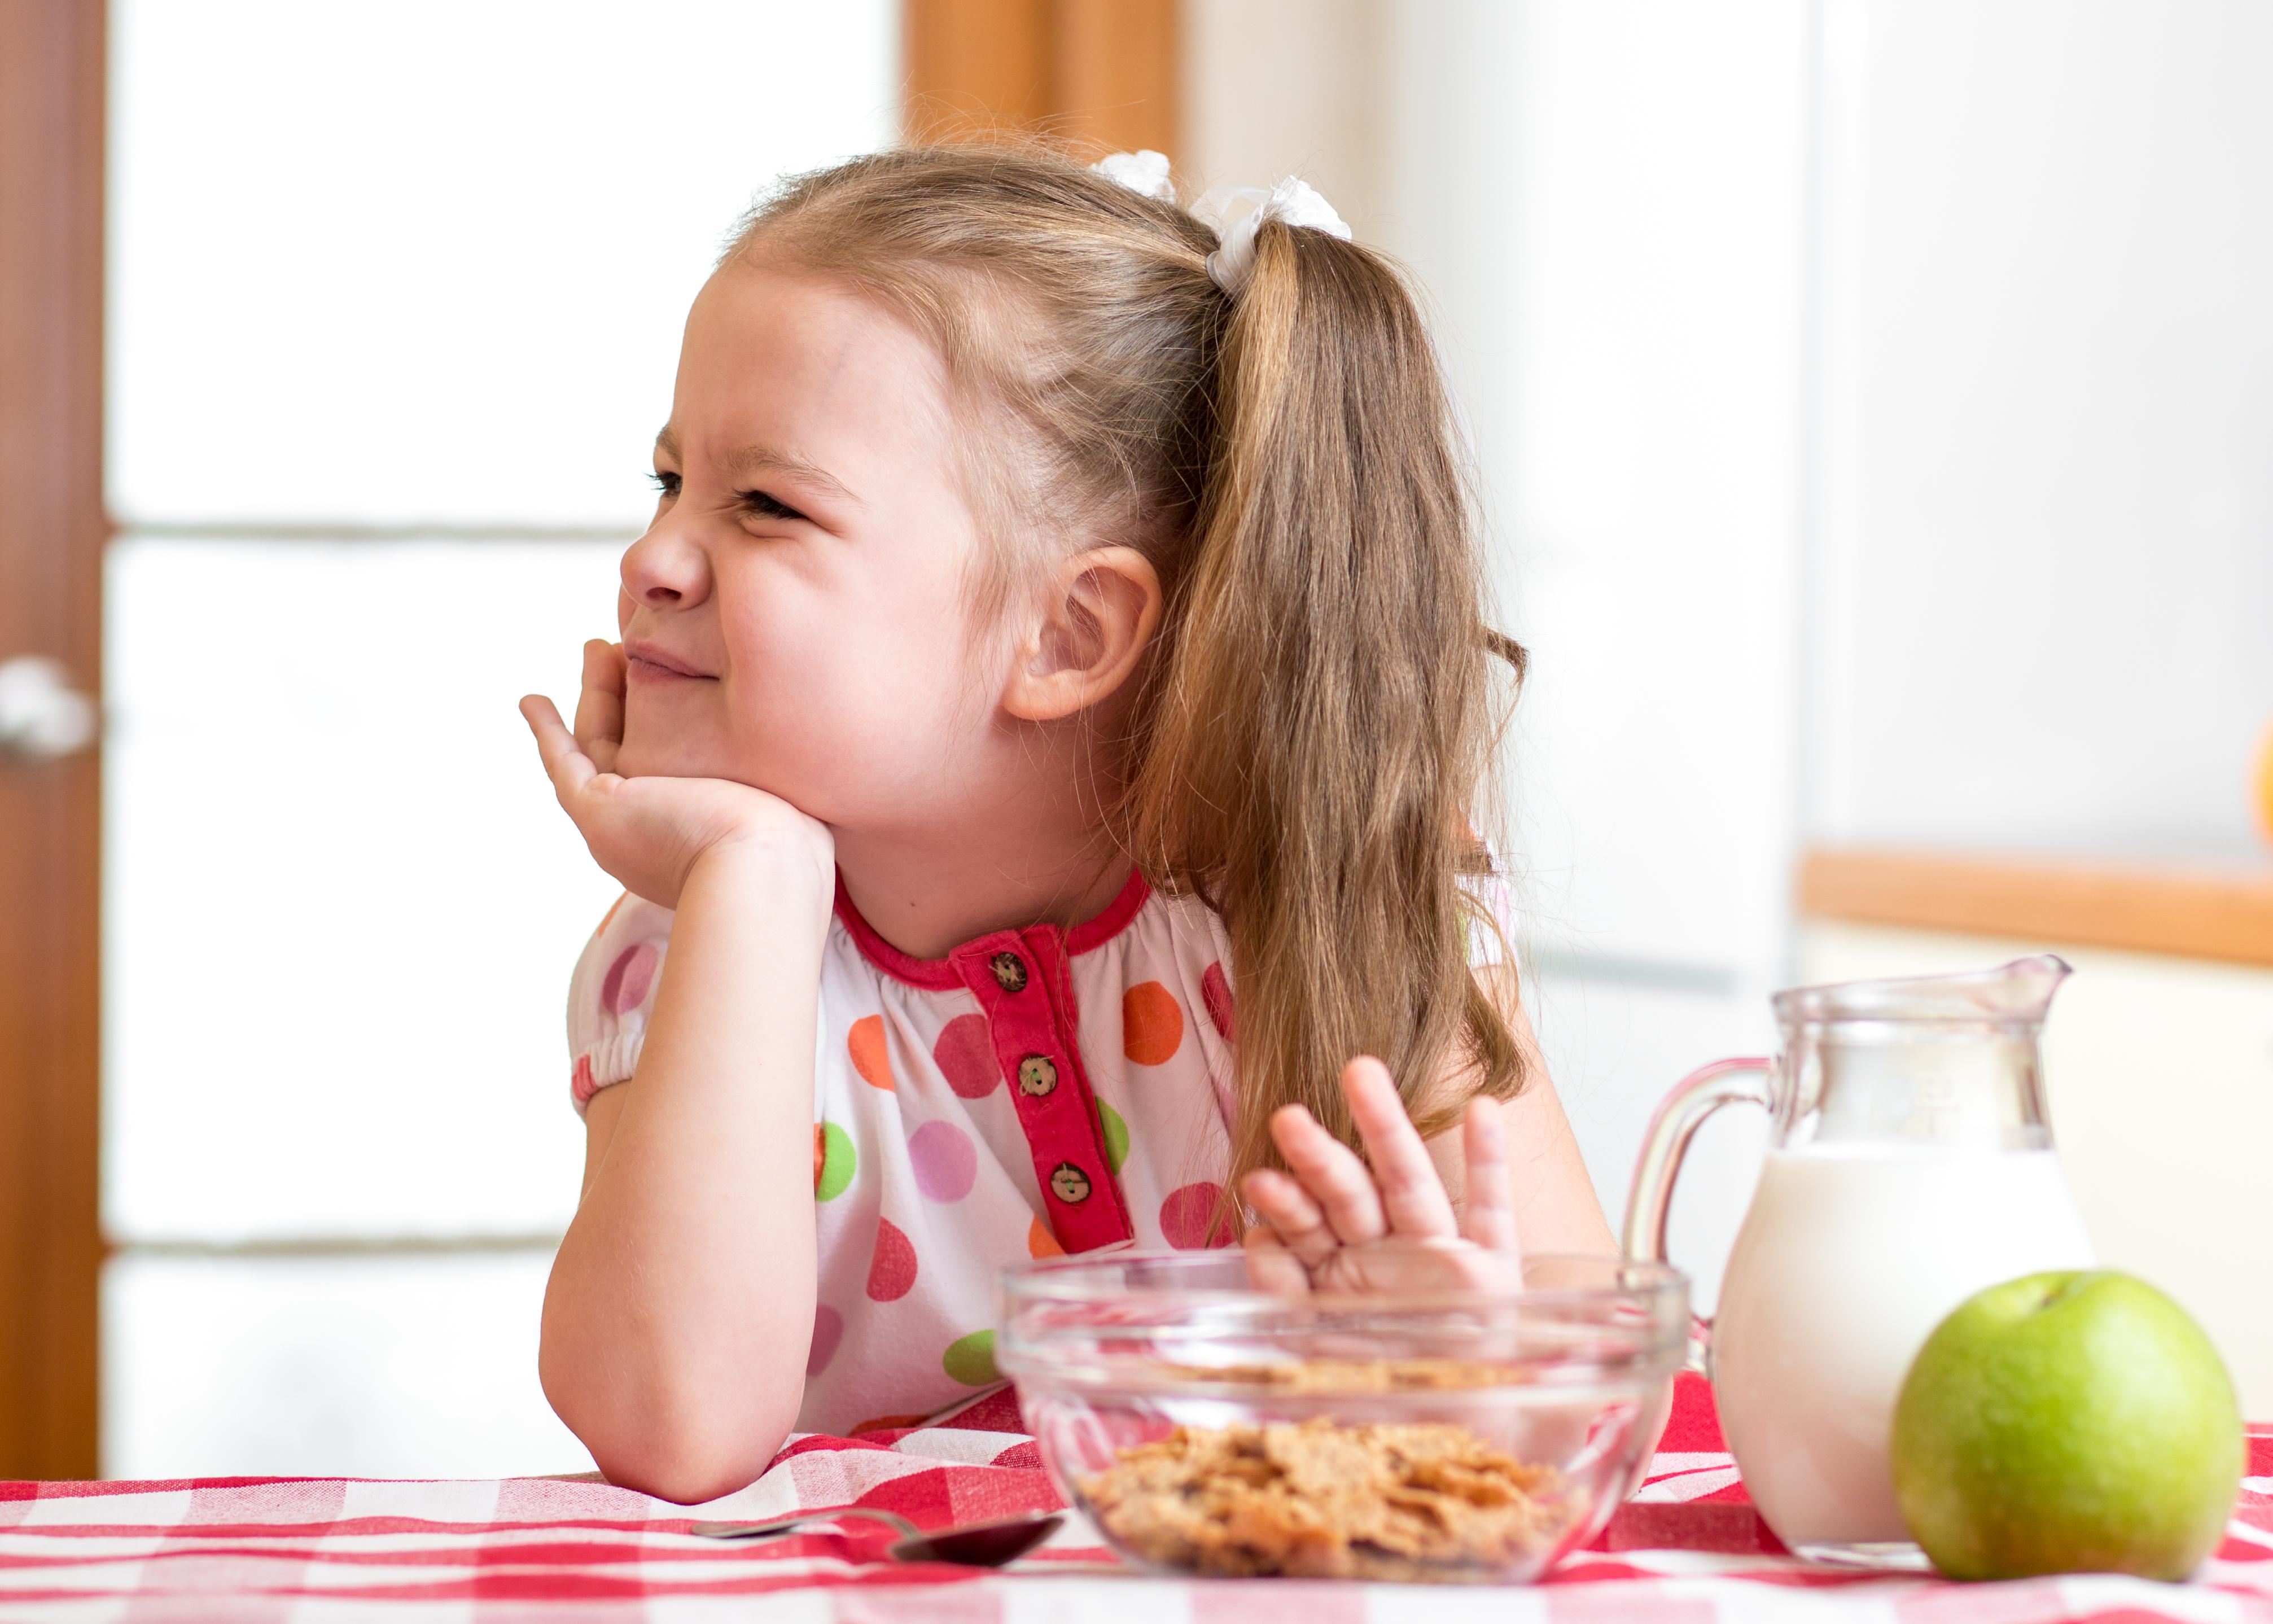 Are you making your child's picky eating worse?